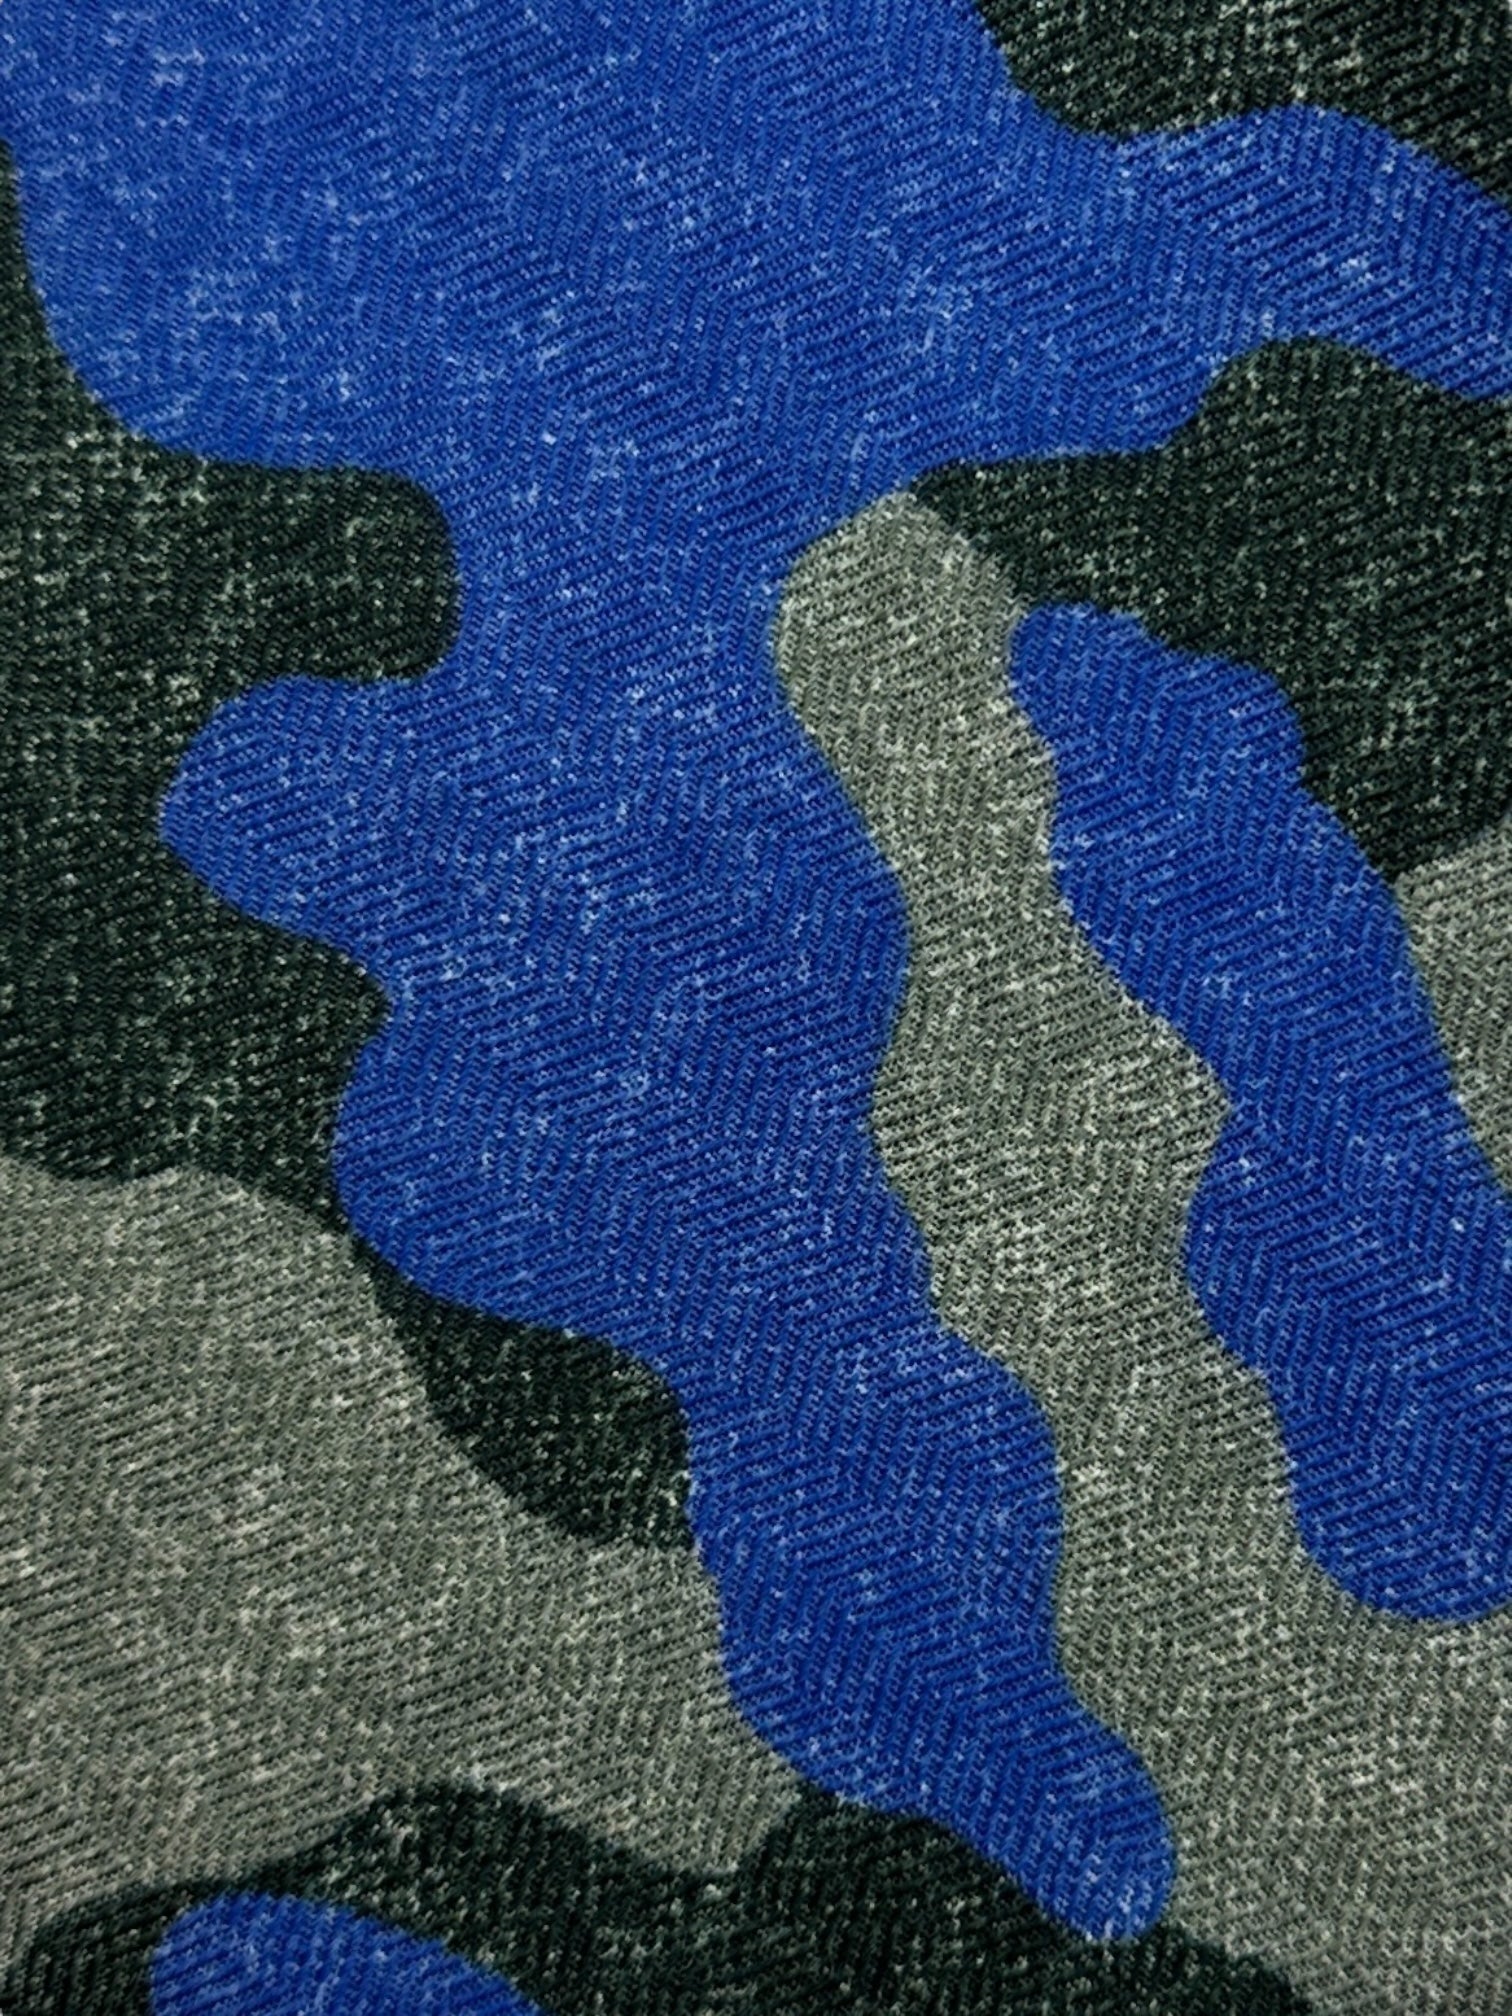 Kiton 7-Fold Grey and Blue Camouflage Tie